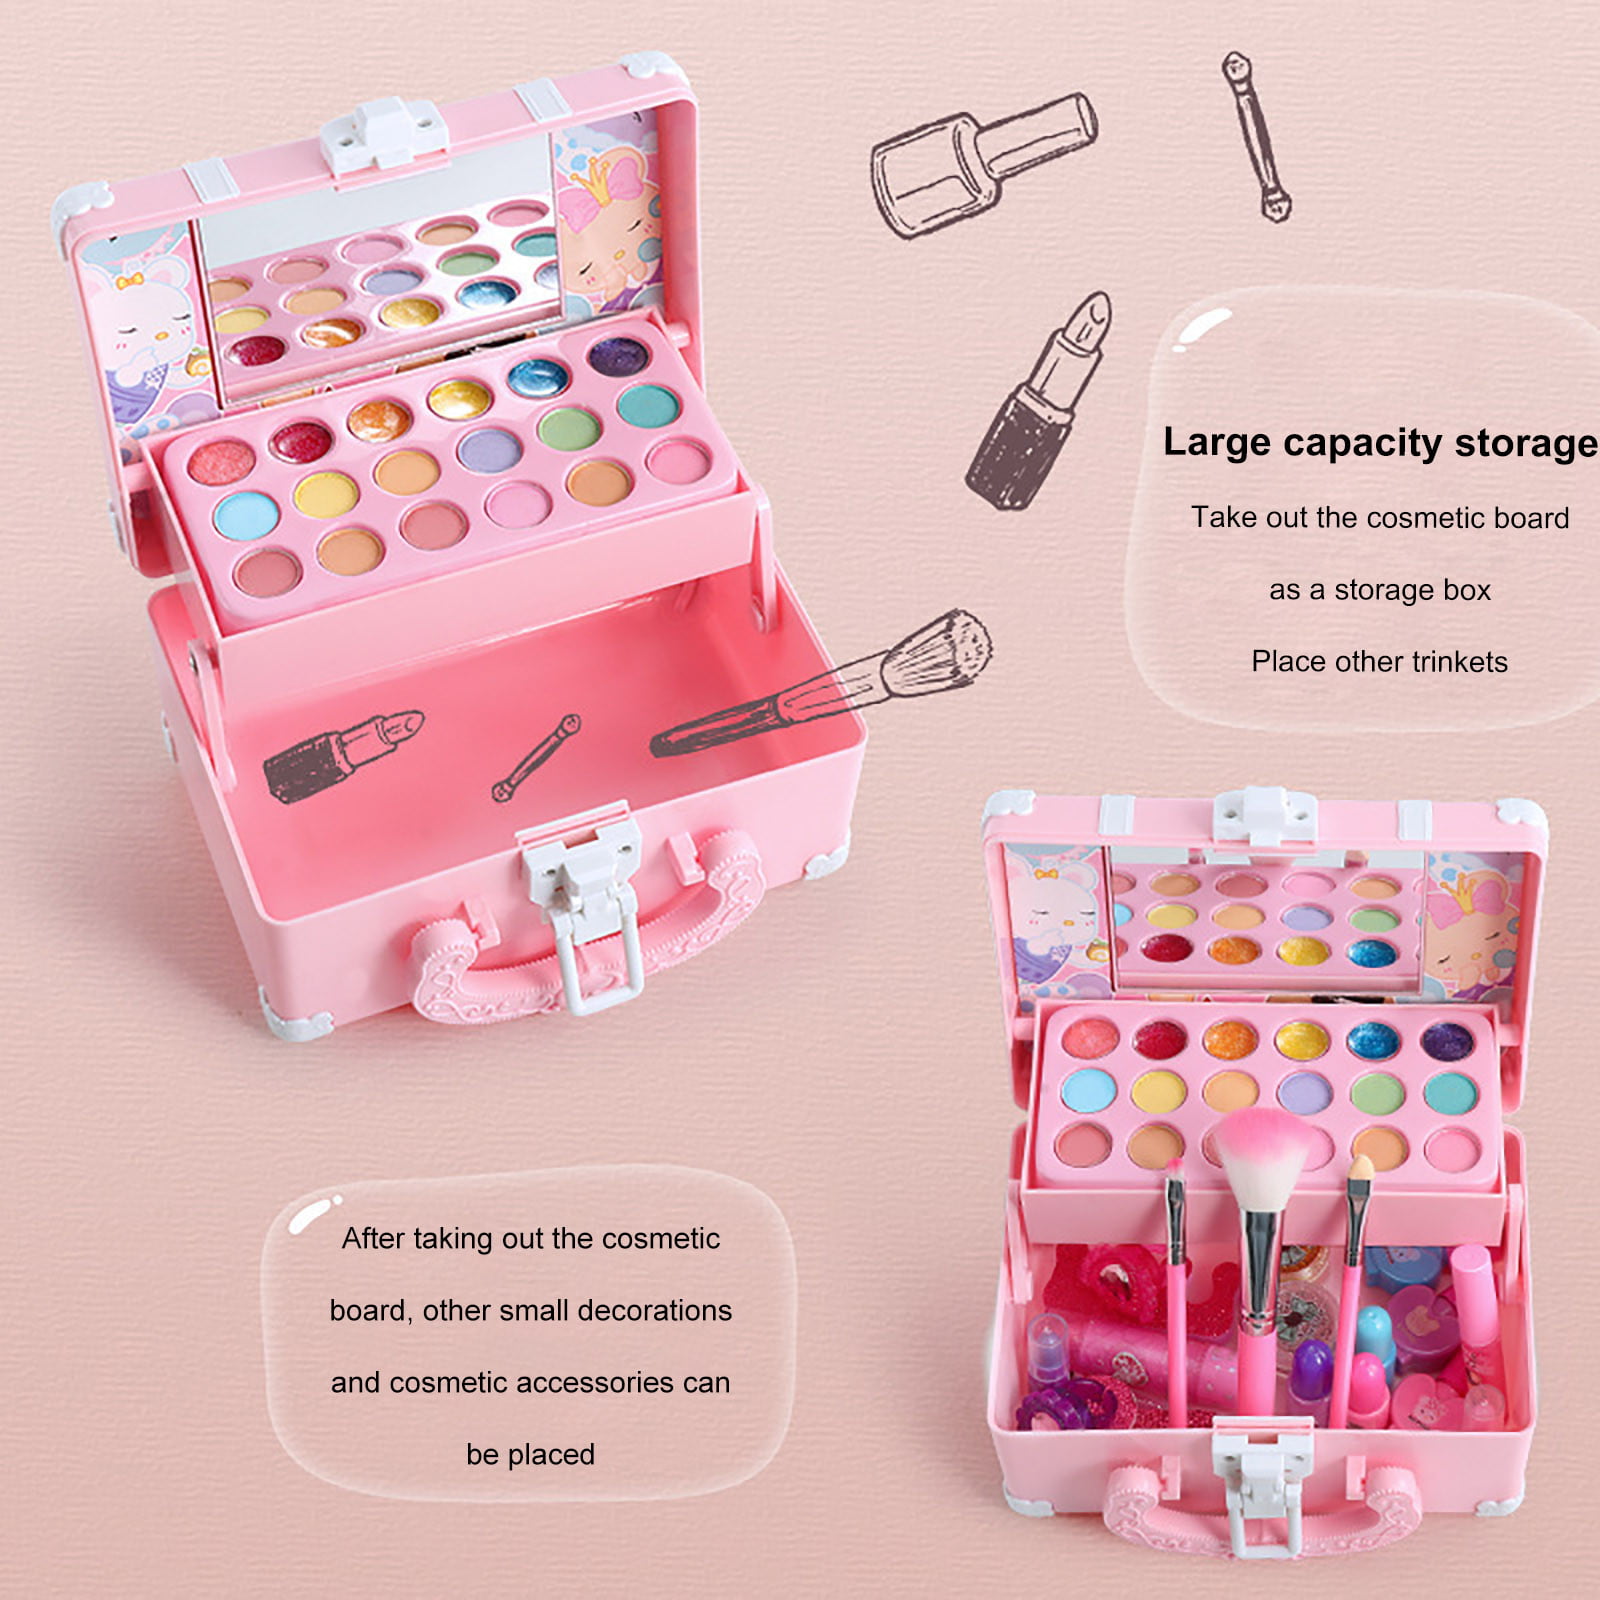 XTEILC Kids Makeup Kit for Girl, Washable Makeup Set Toy with Real